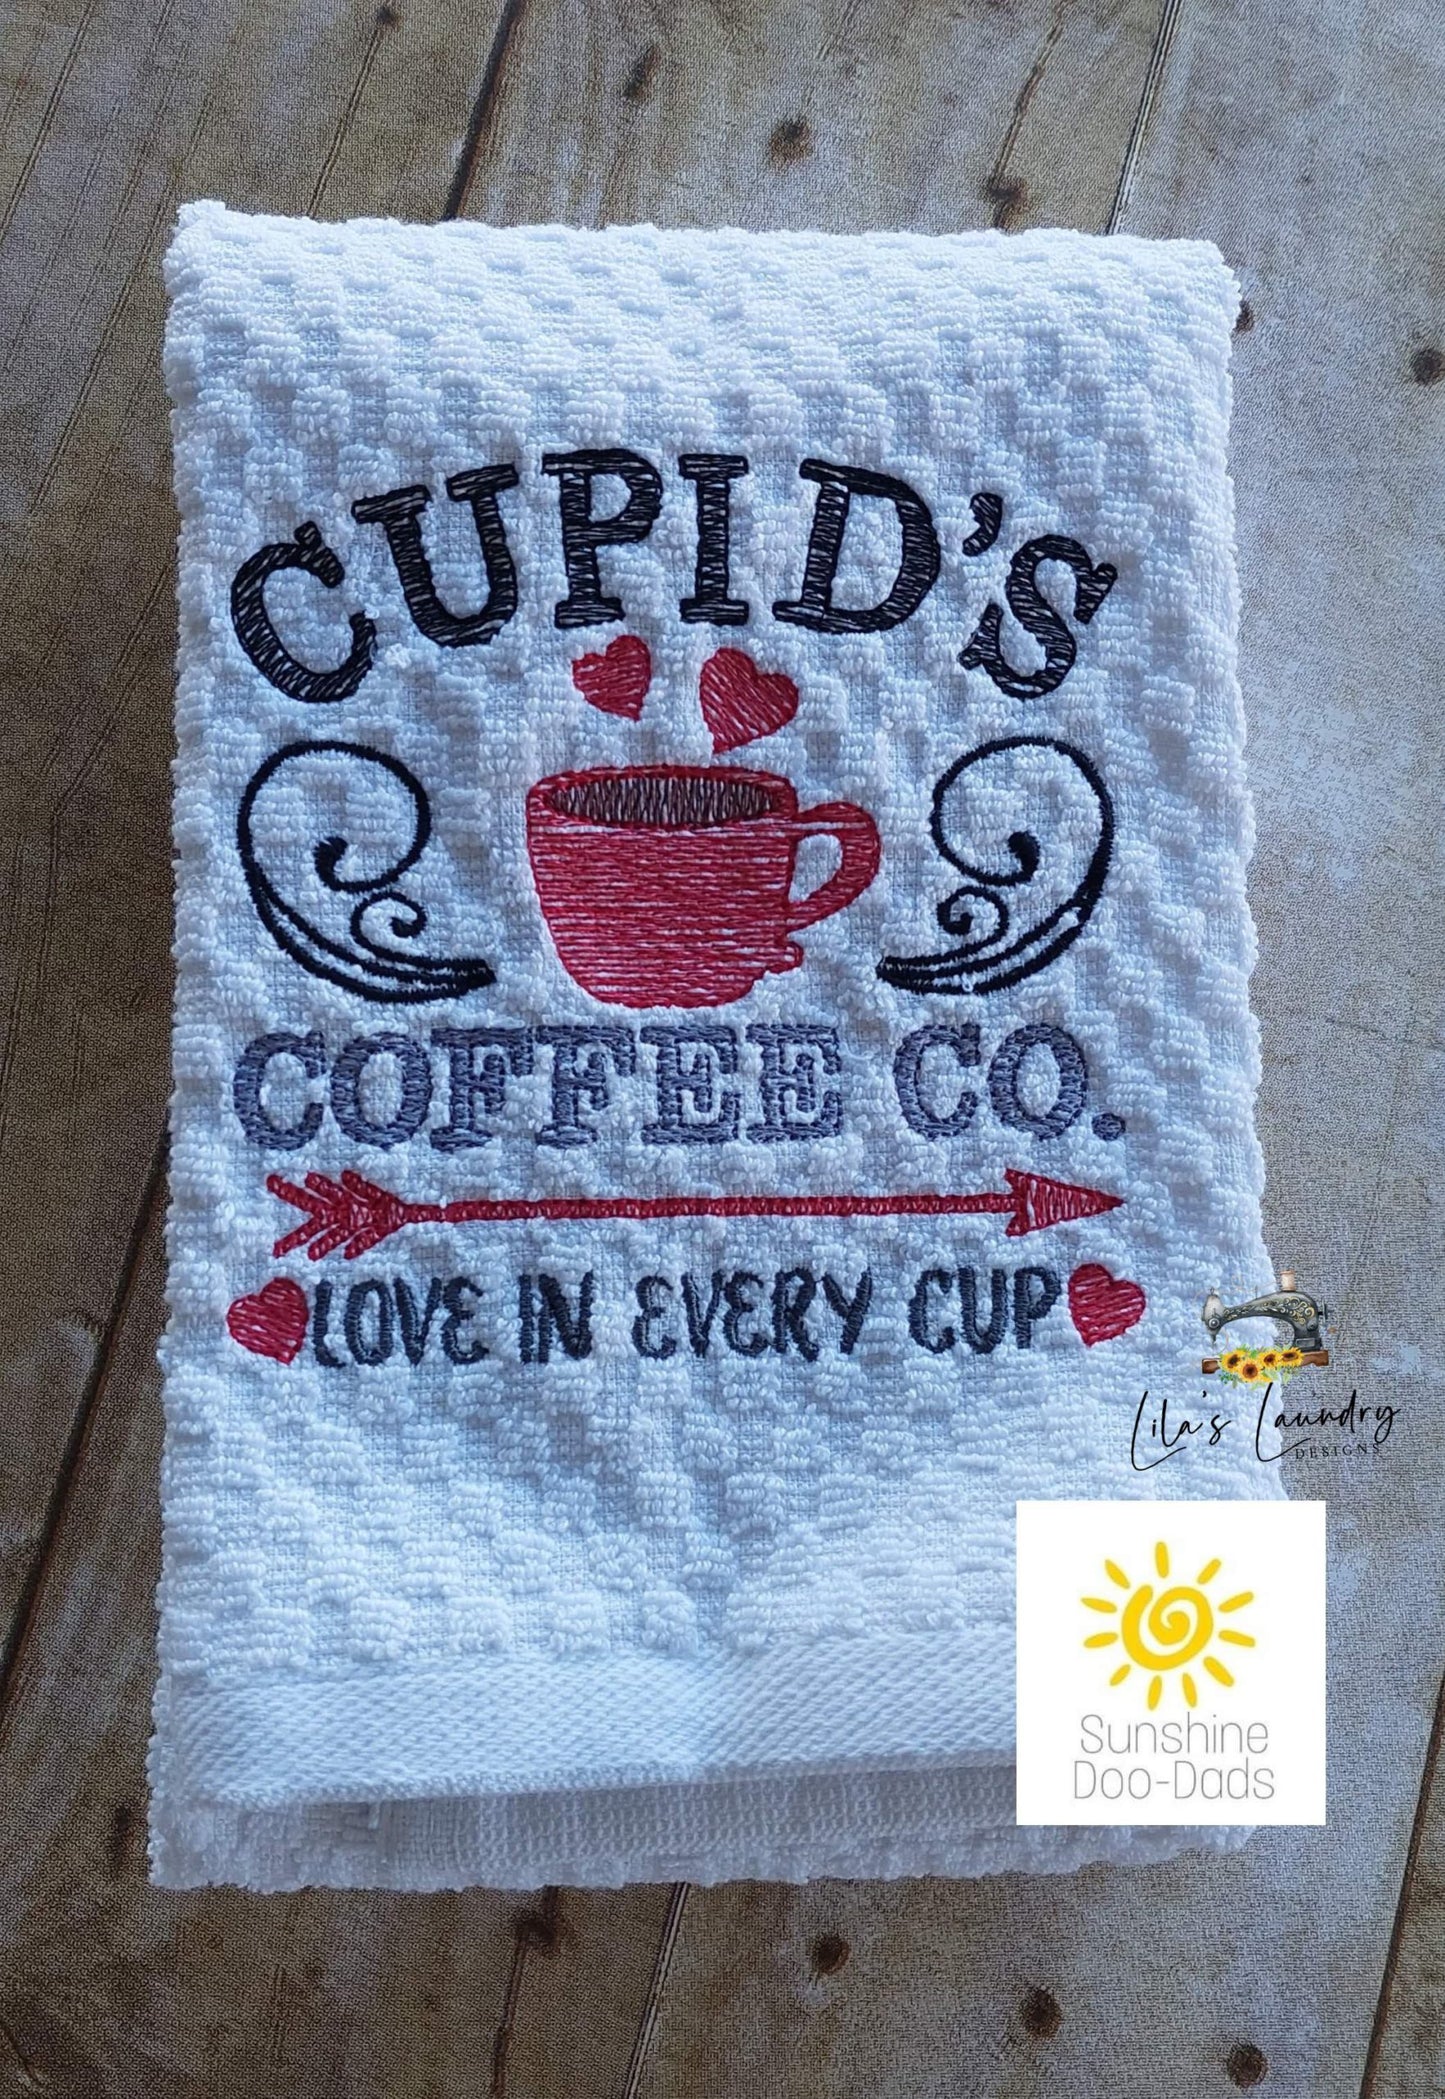 Cupid's Coffee Co. Sketch - 3 sizes- Digital Embroidery Design